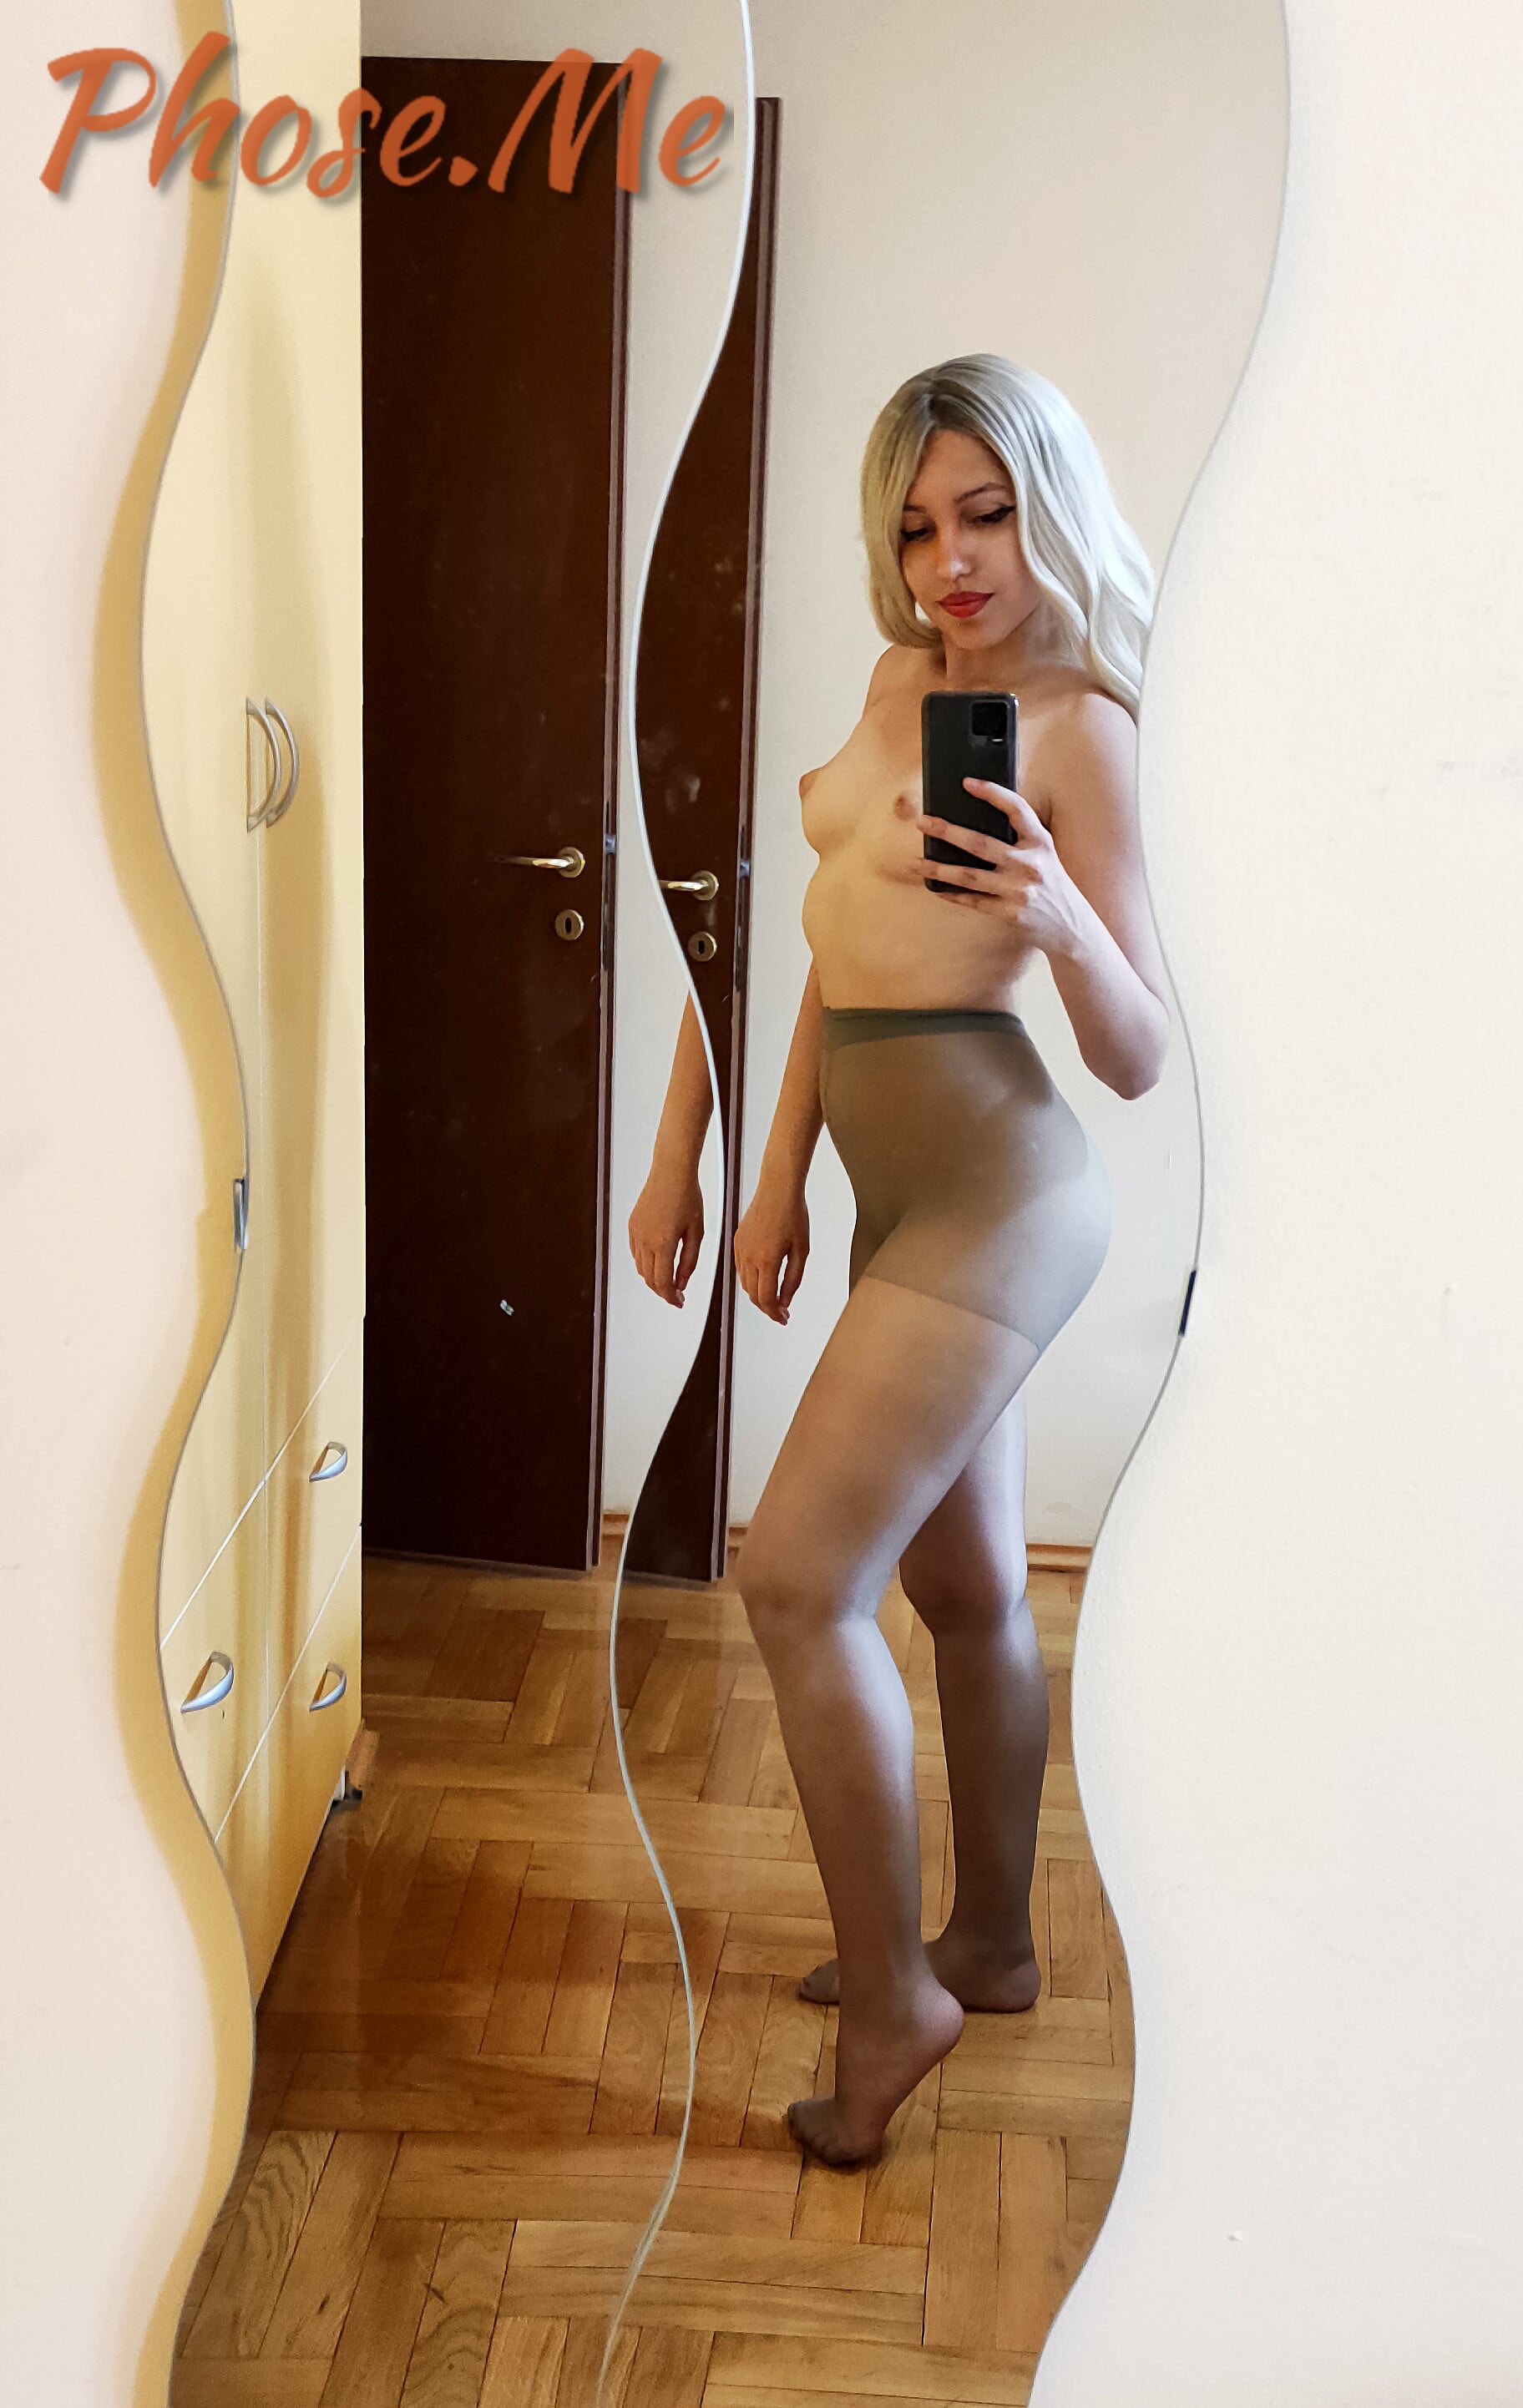 Nothing But Pantyhose On In This Selfie